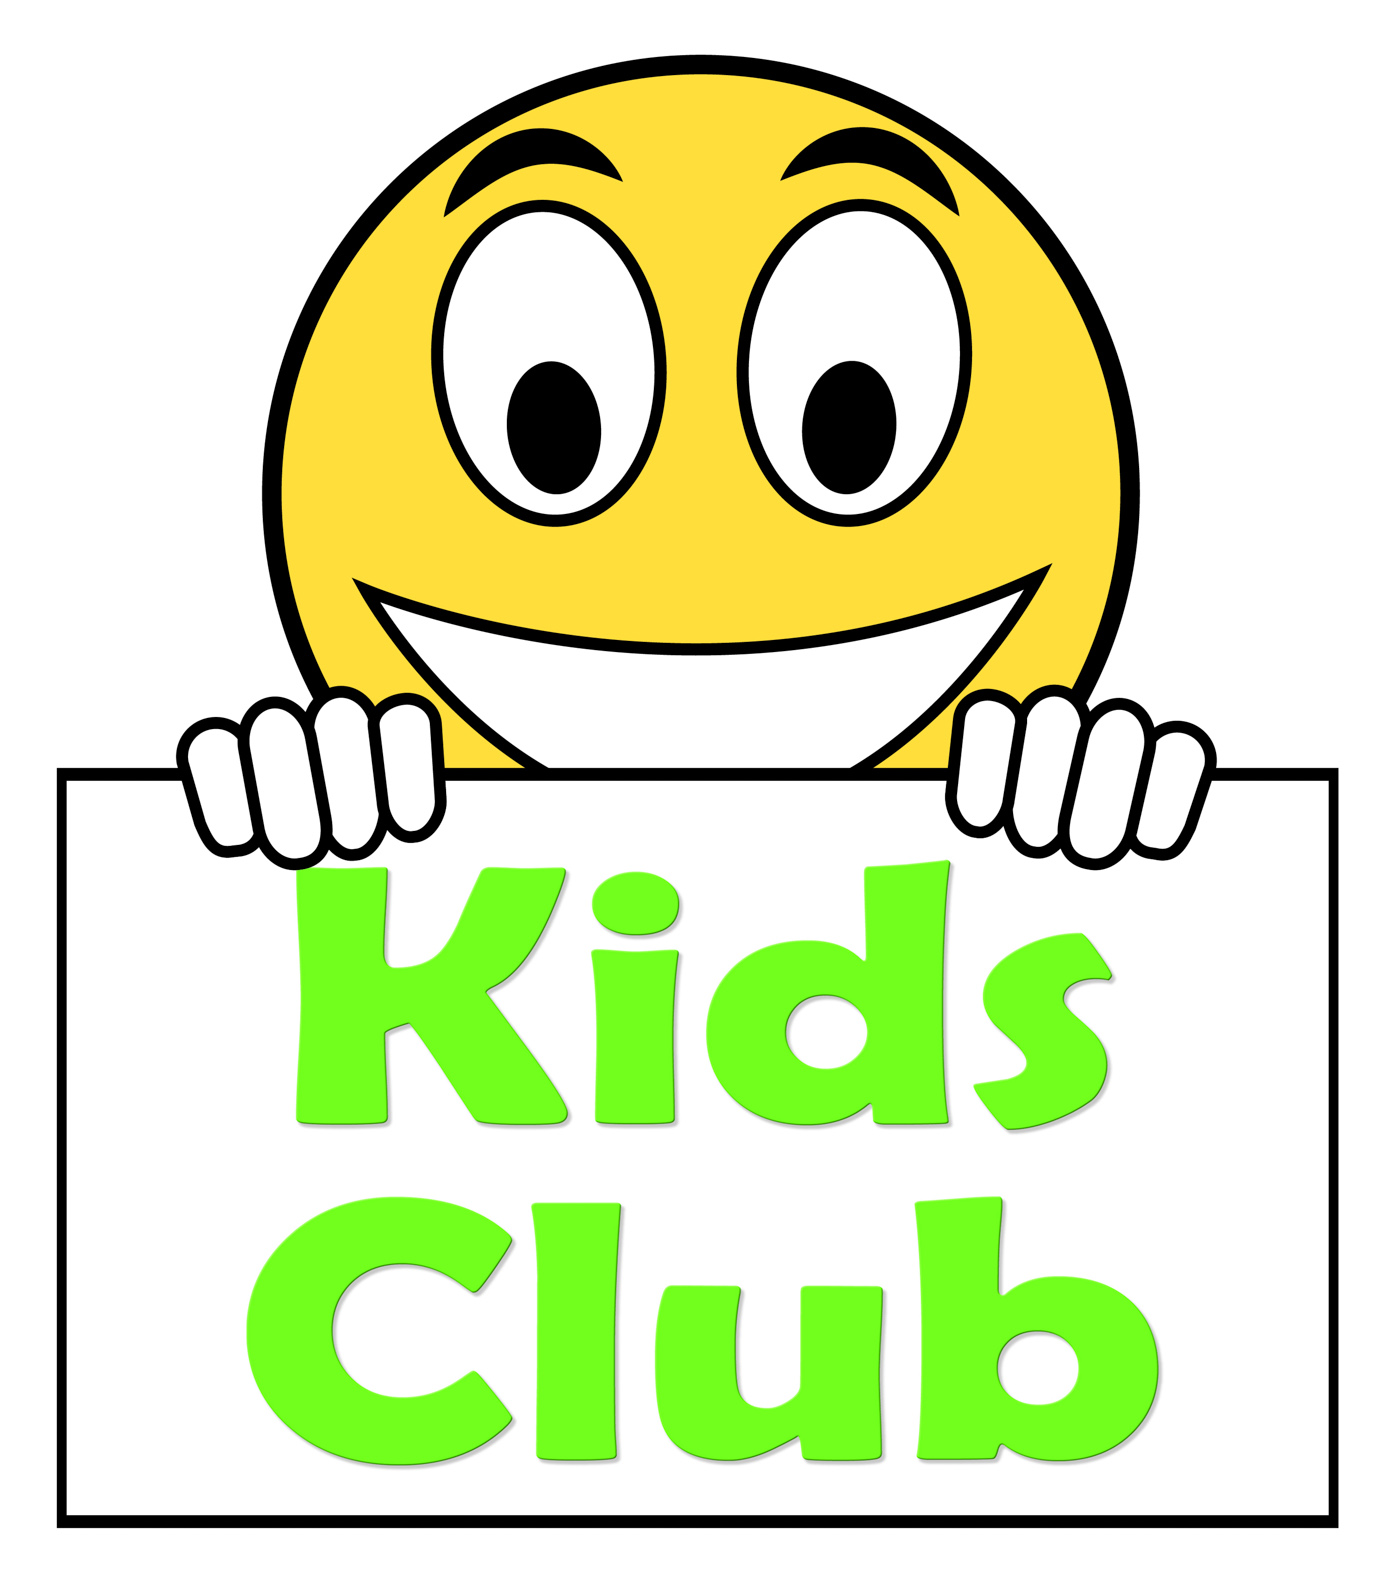 Kids club on sign means childrens activities photo